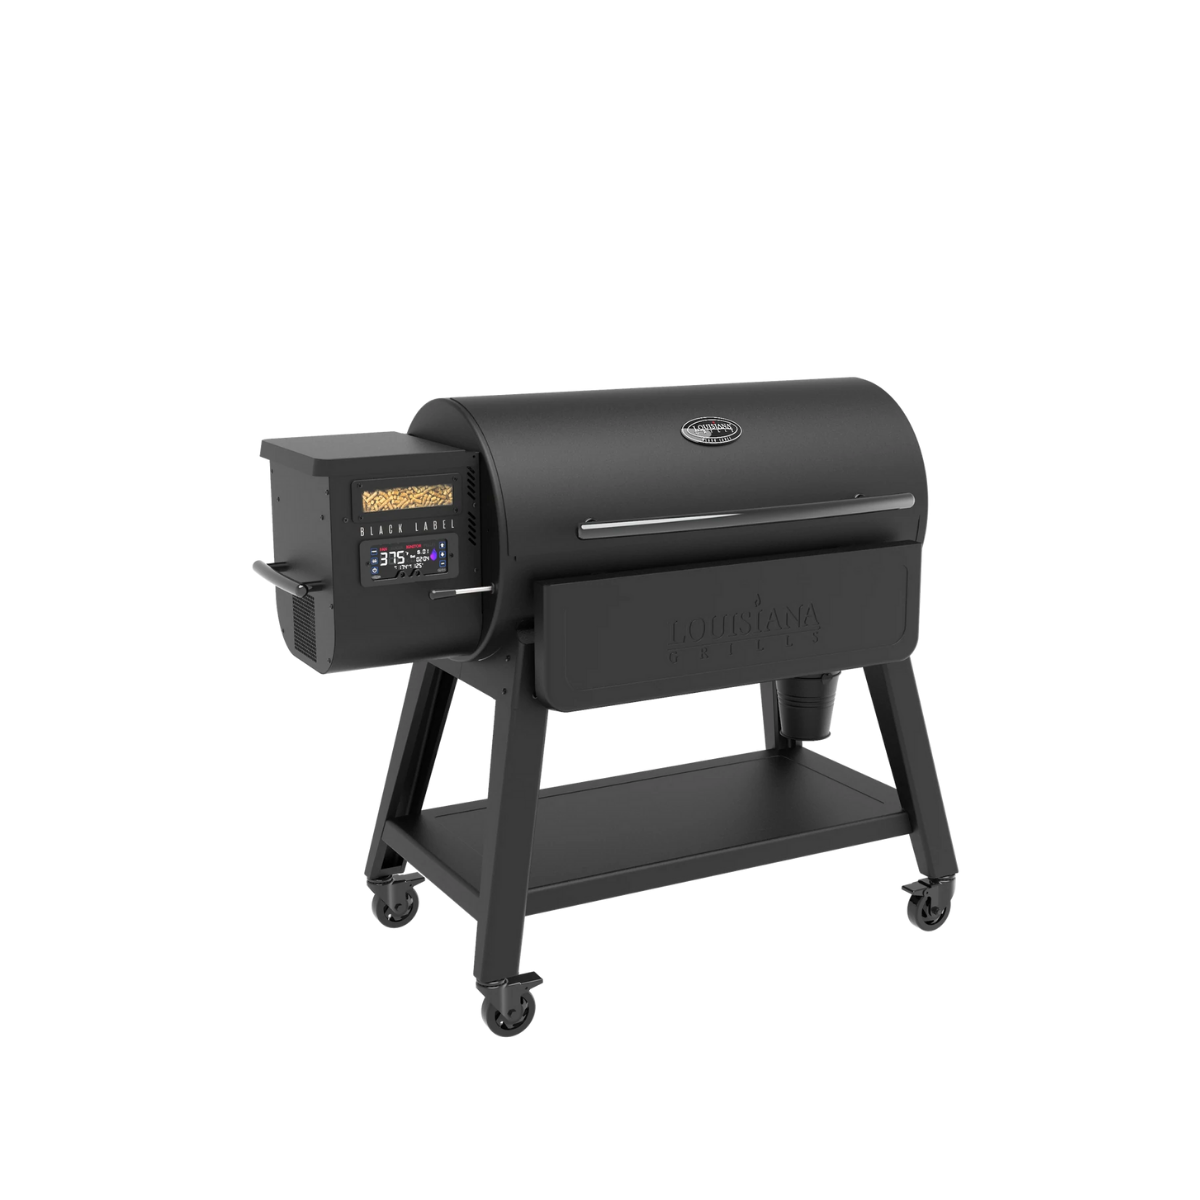 1200 Black Label Series Grill With Wifi Control 1